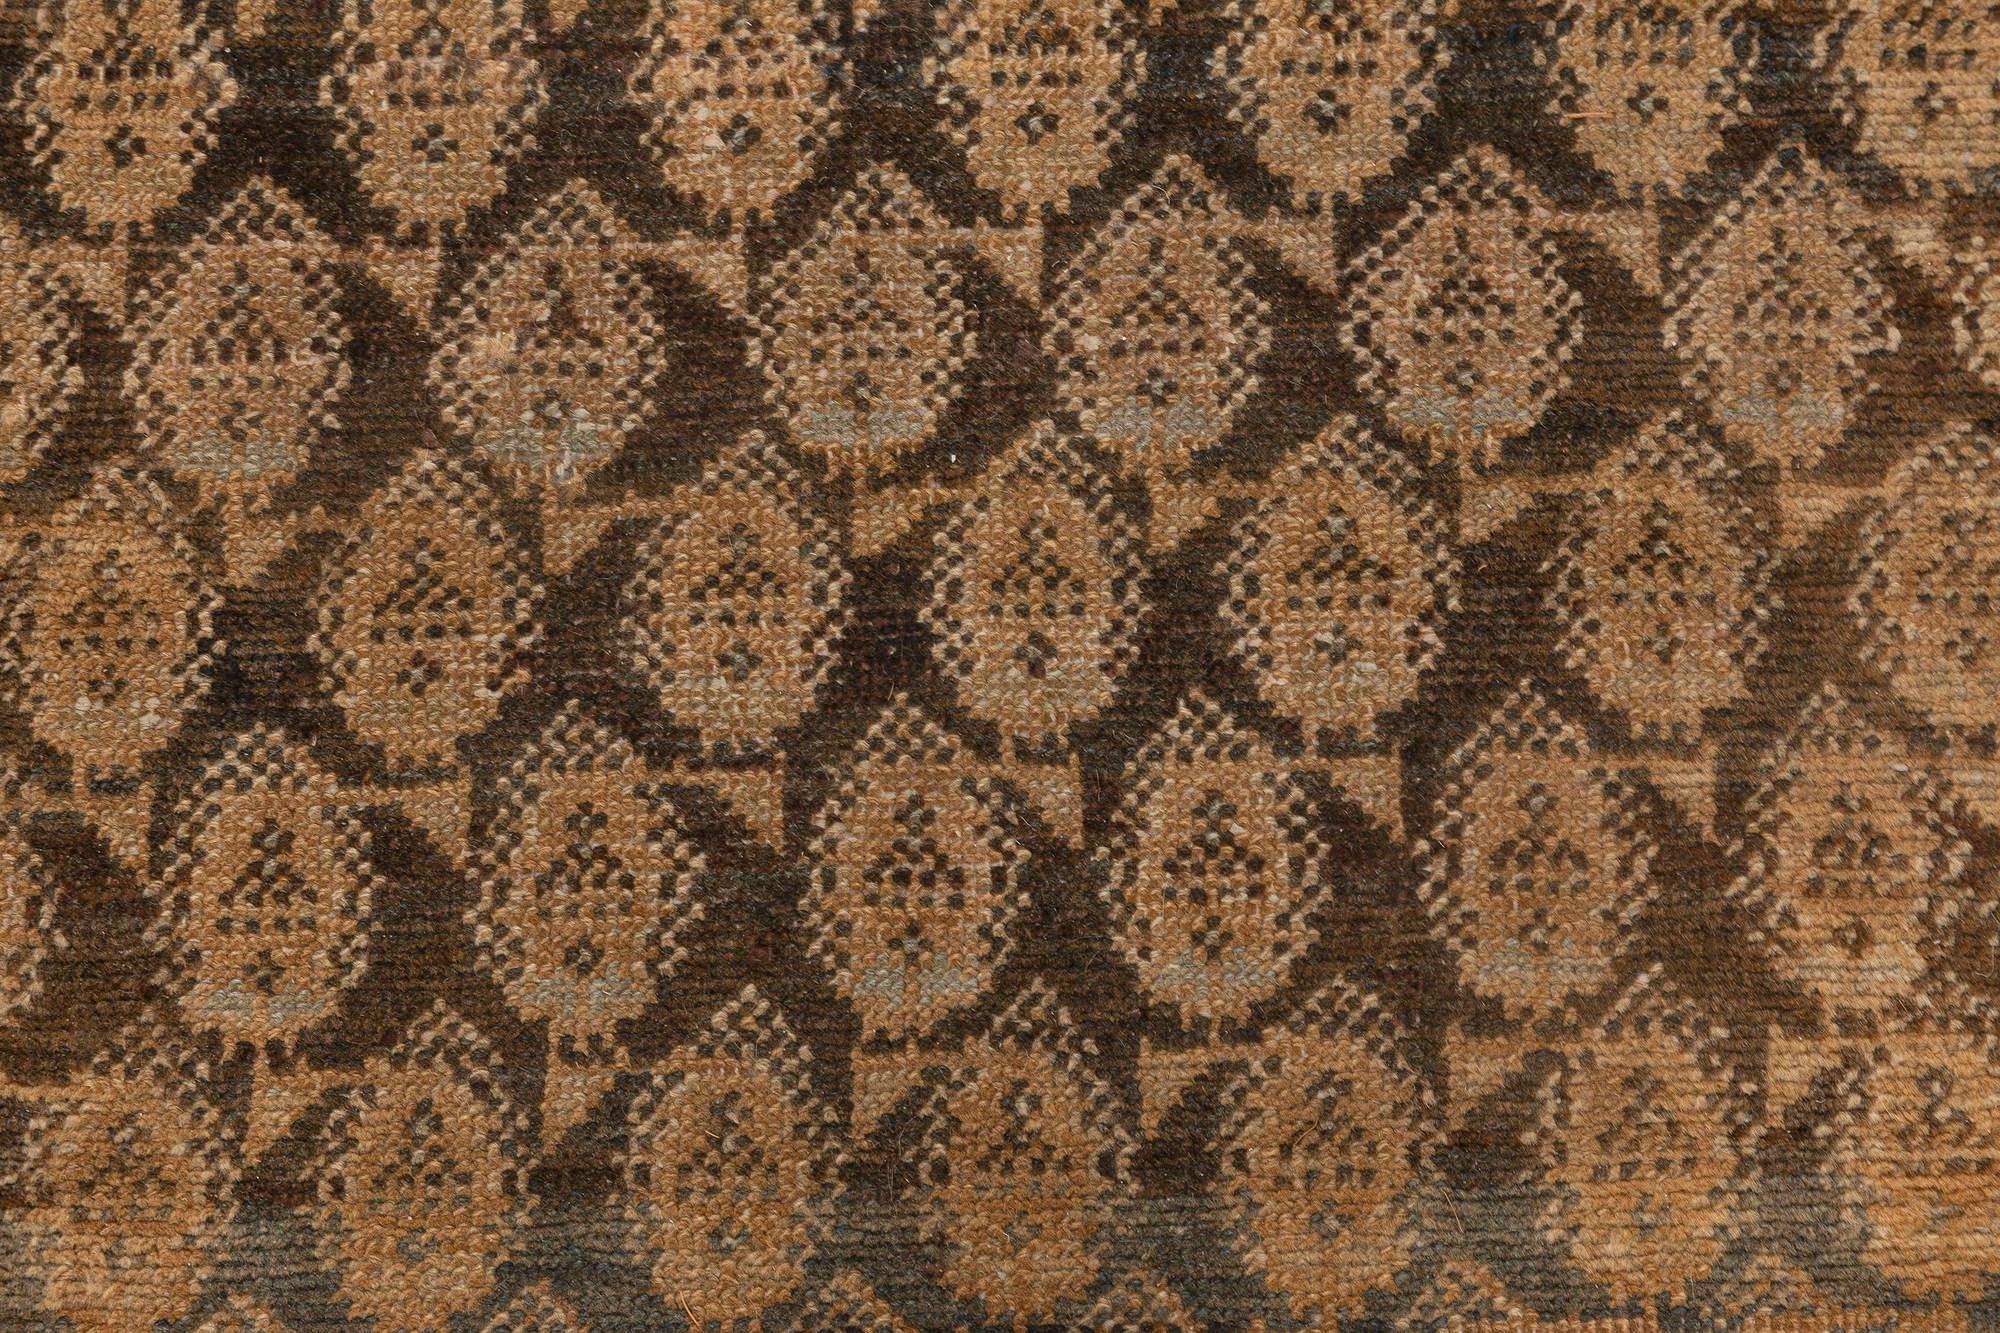 Early 20th century Malayer runner
Size: 3'3